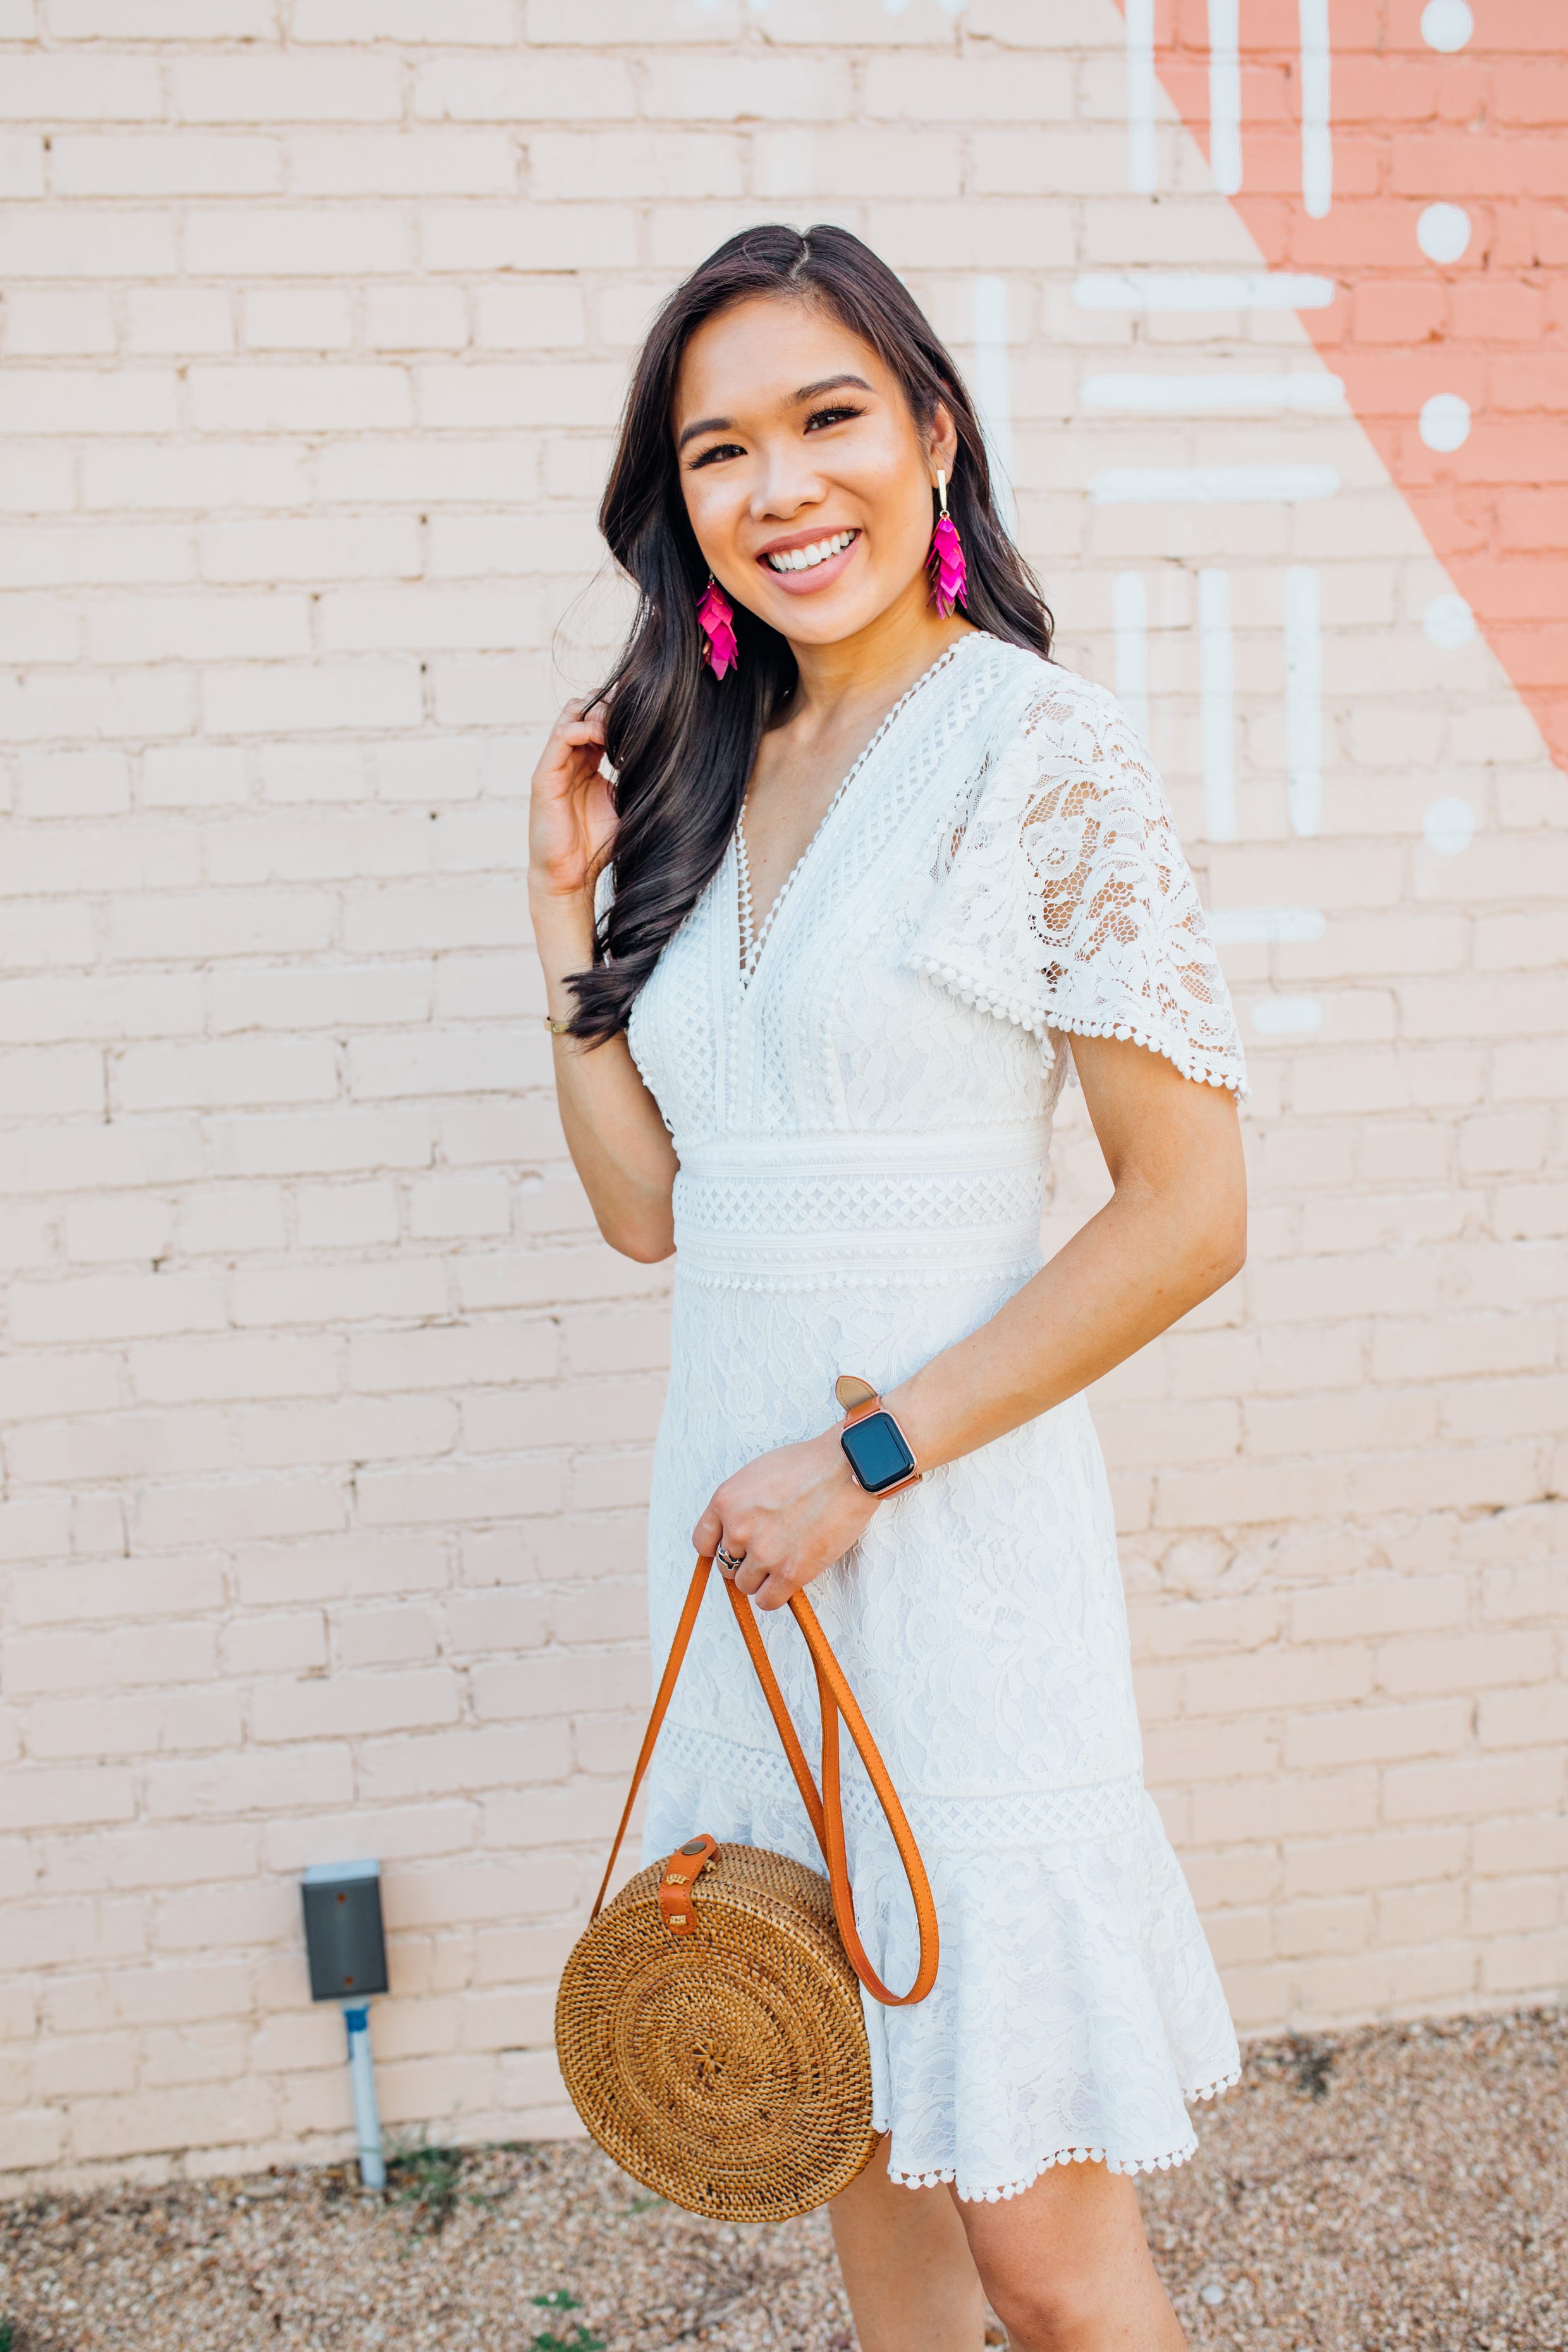 Blogger Hoang-Kim shares a white lace dress for a summer outfit of the day